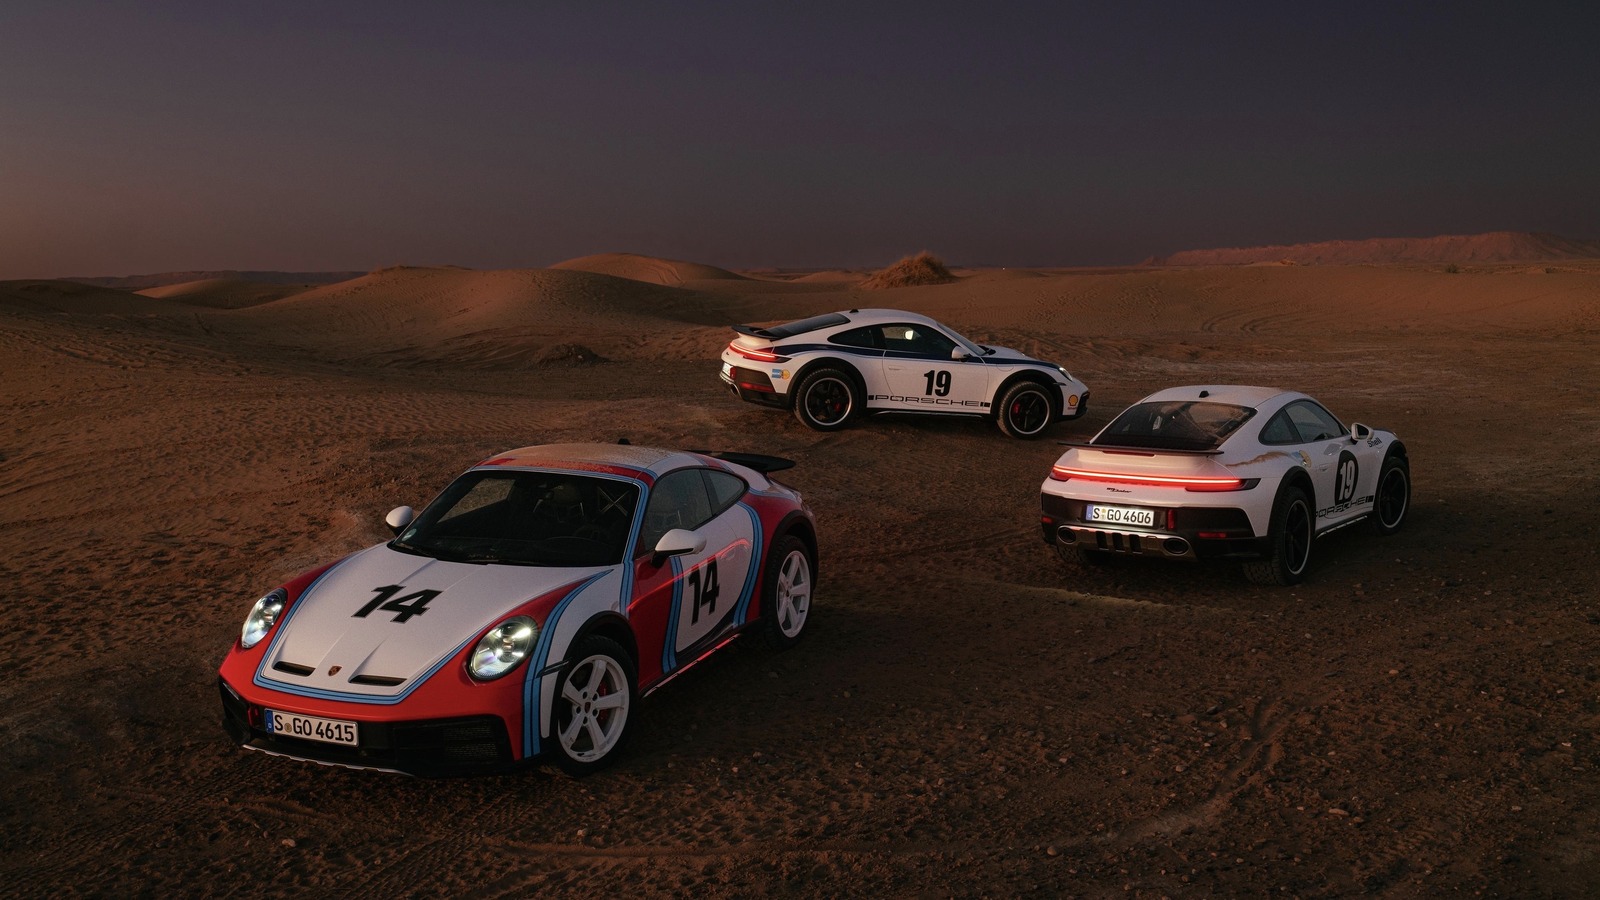 Porsche's New 911 Dakar Wraps Are A Throwback To Rally Legends Of The 1970s